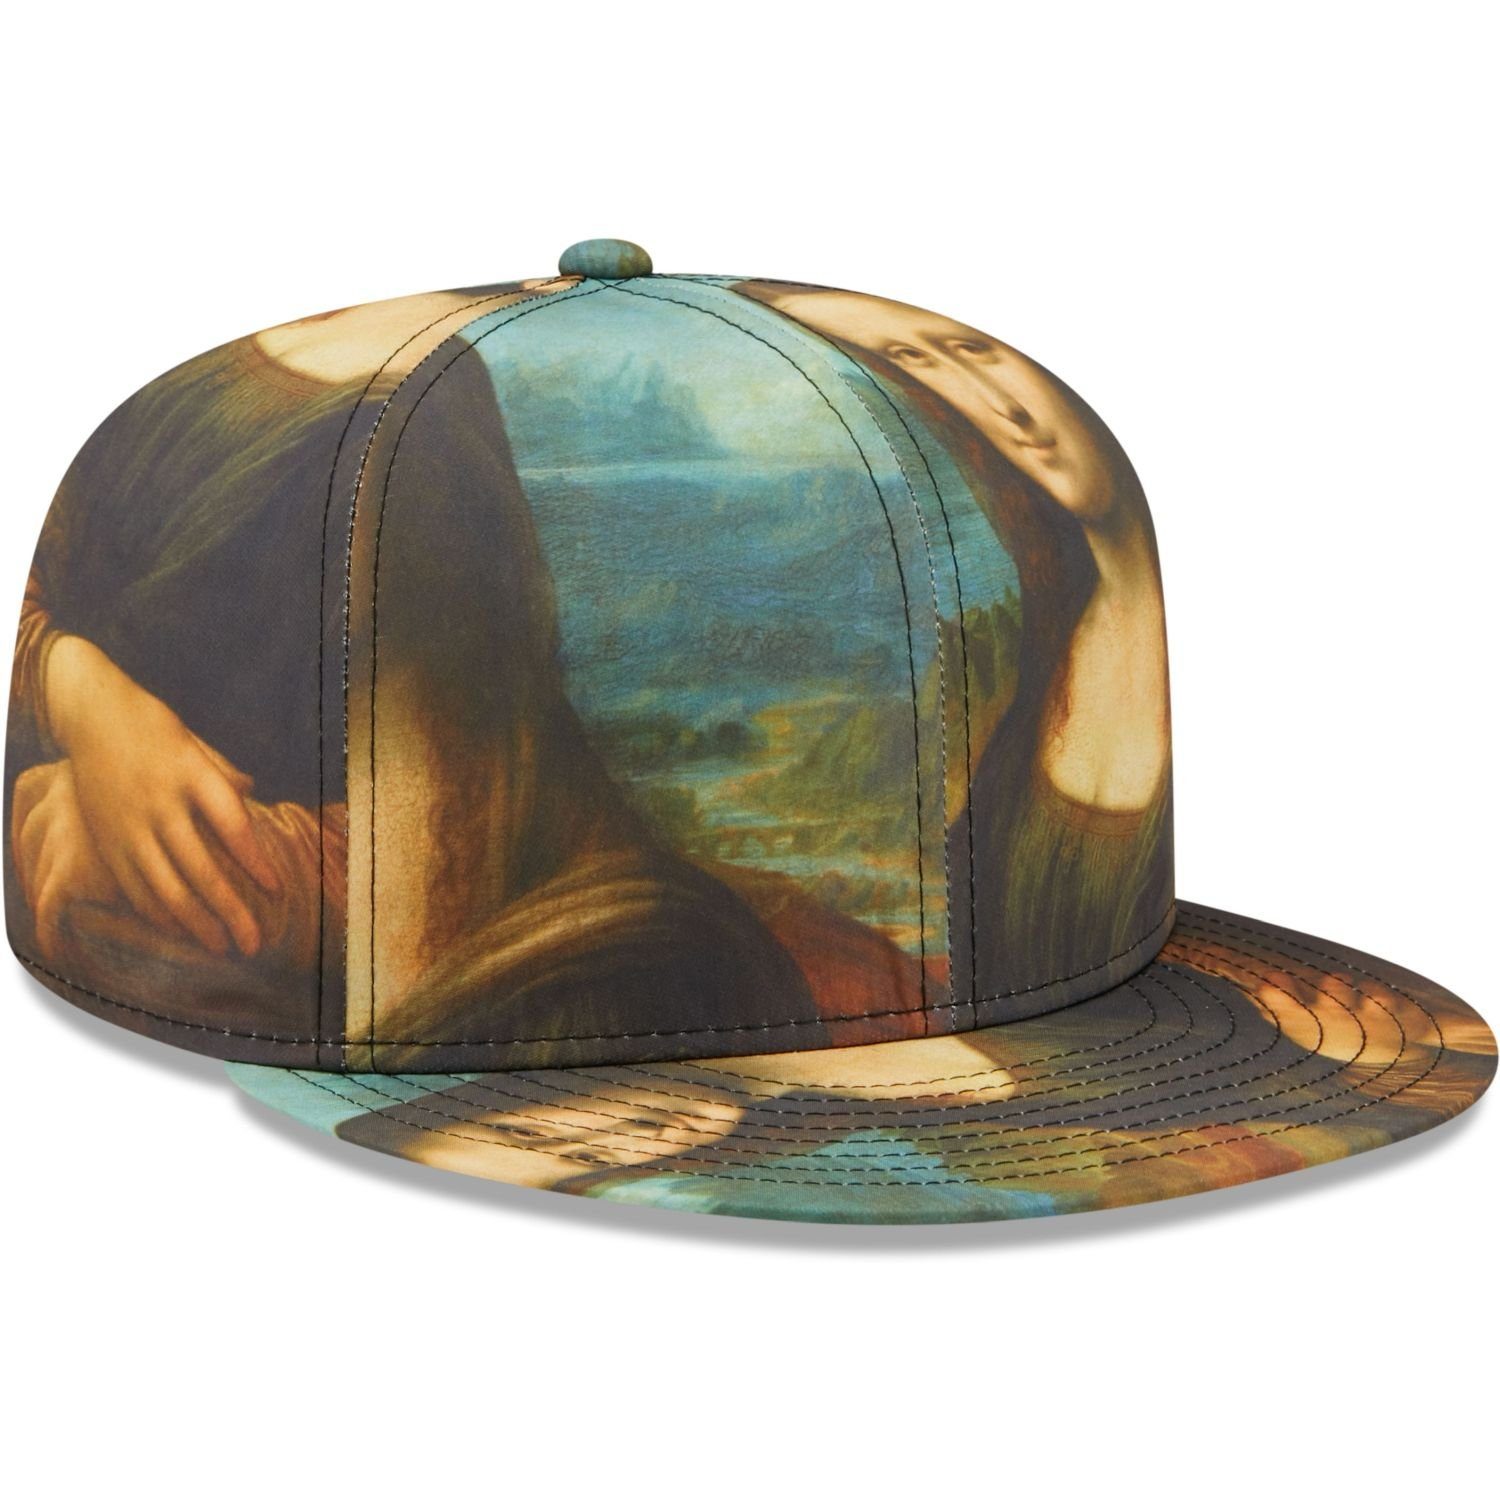 LOUVRE Fitted 59Fifty Mona Lisa Era New Cap LE